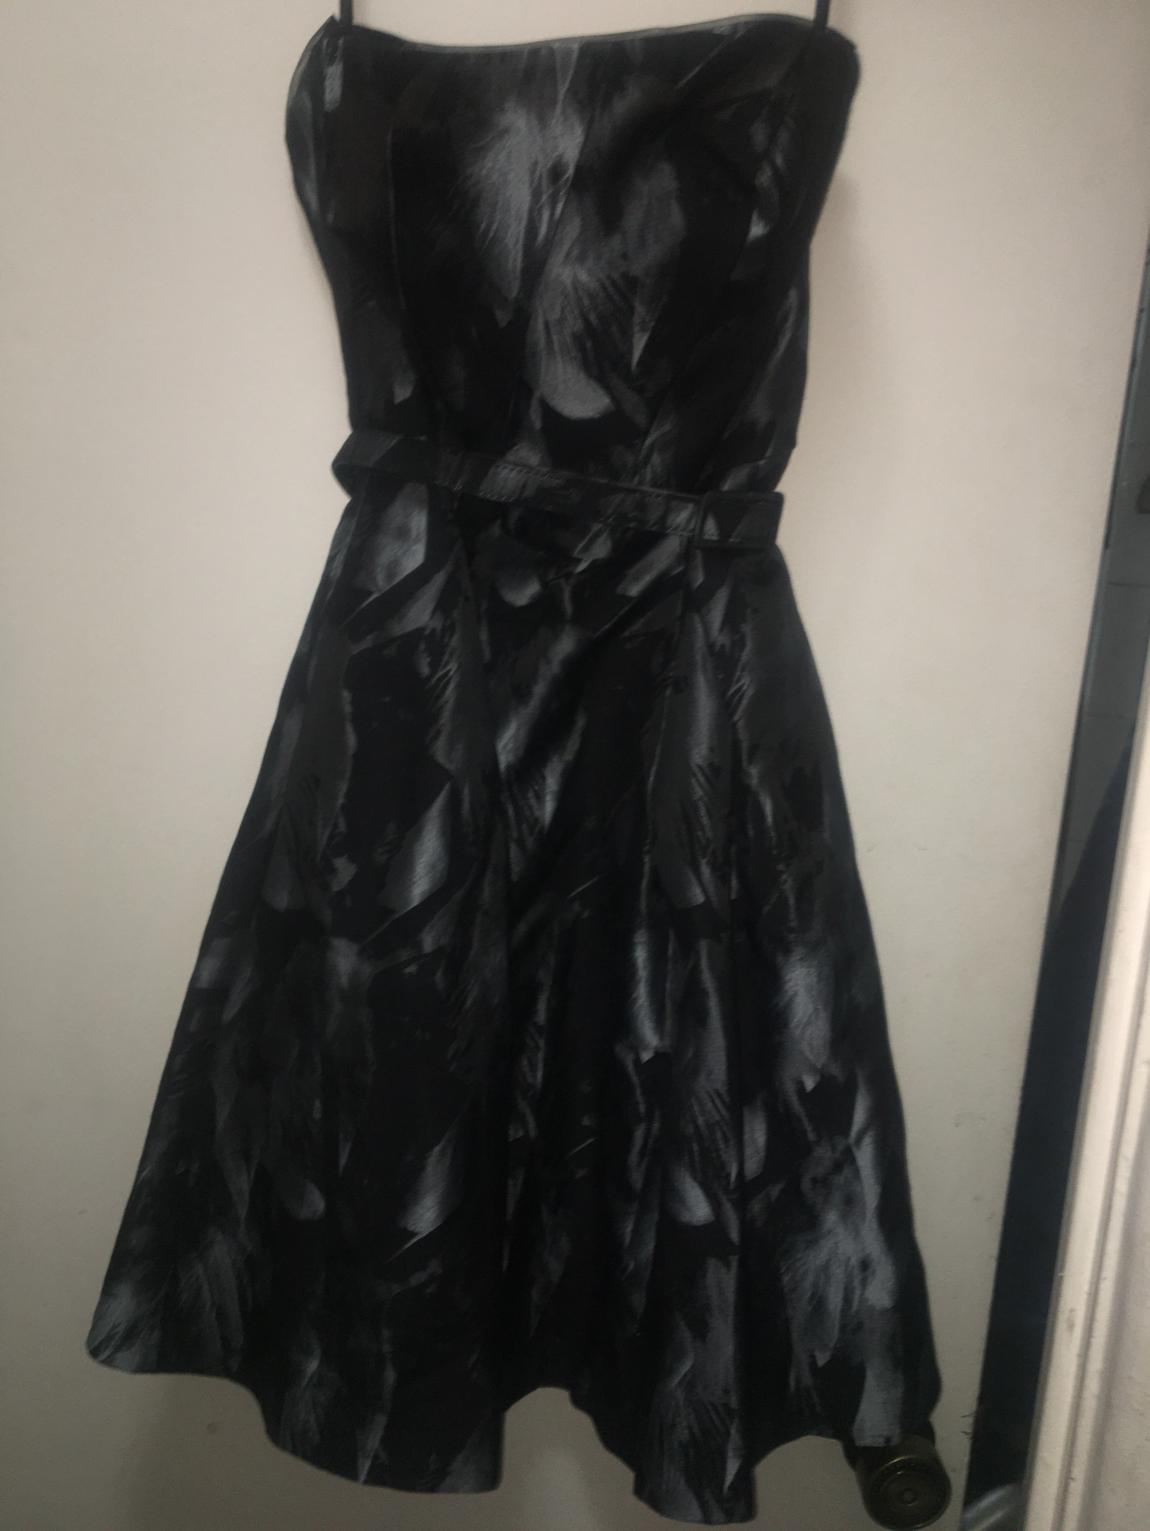 White House black market Size 6 Prom Black Ball Gown on Queenly